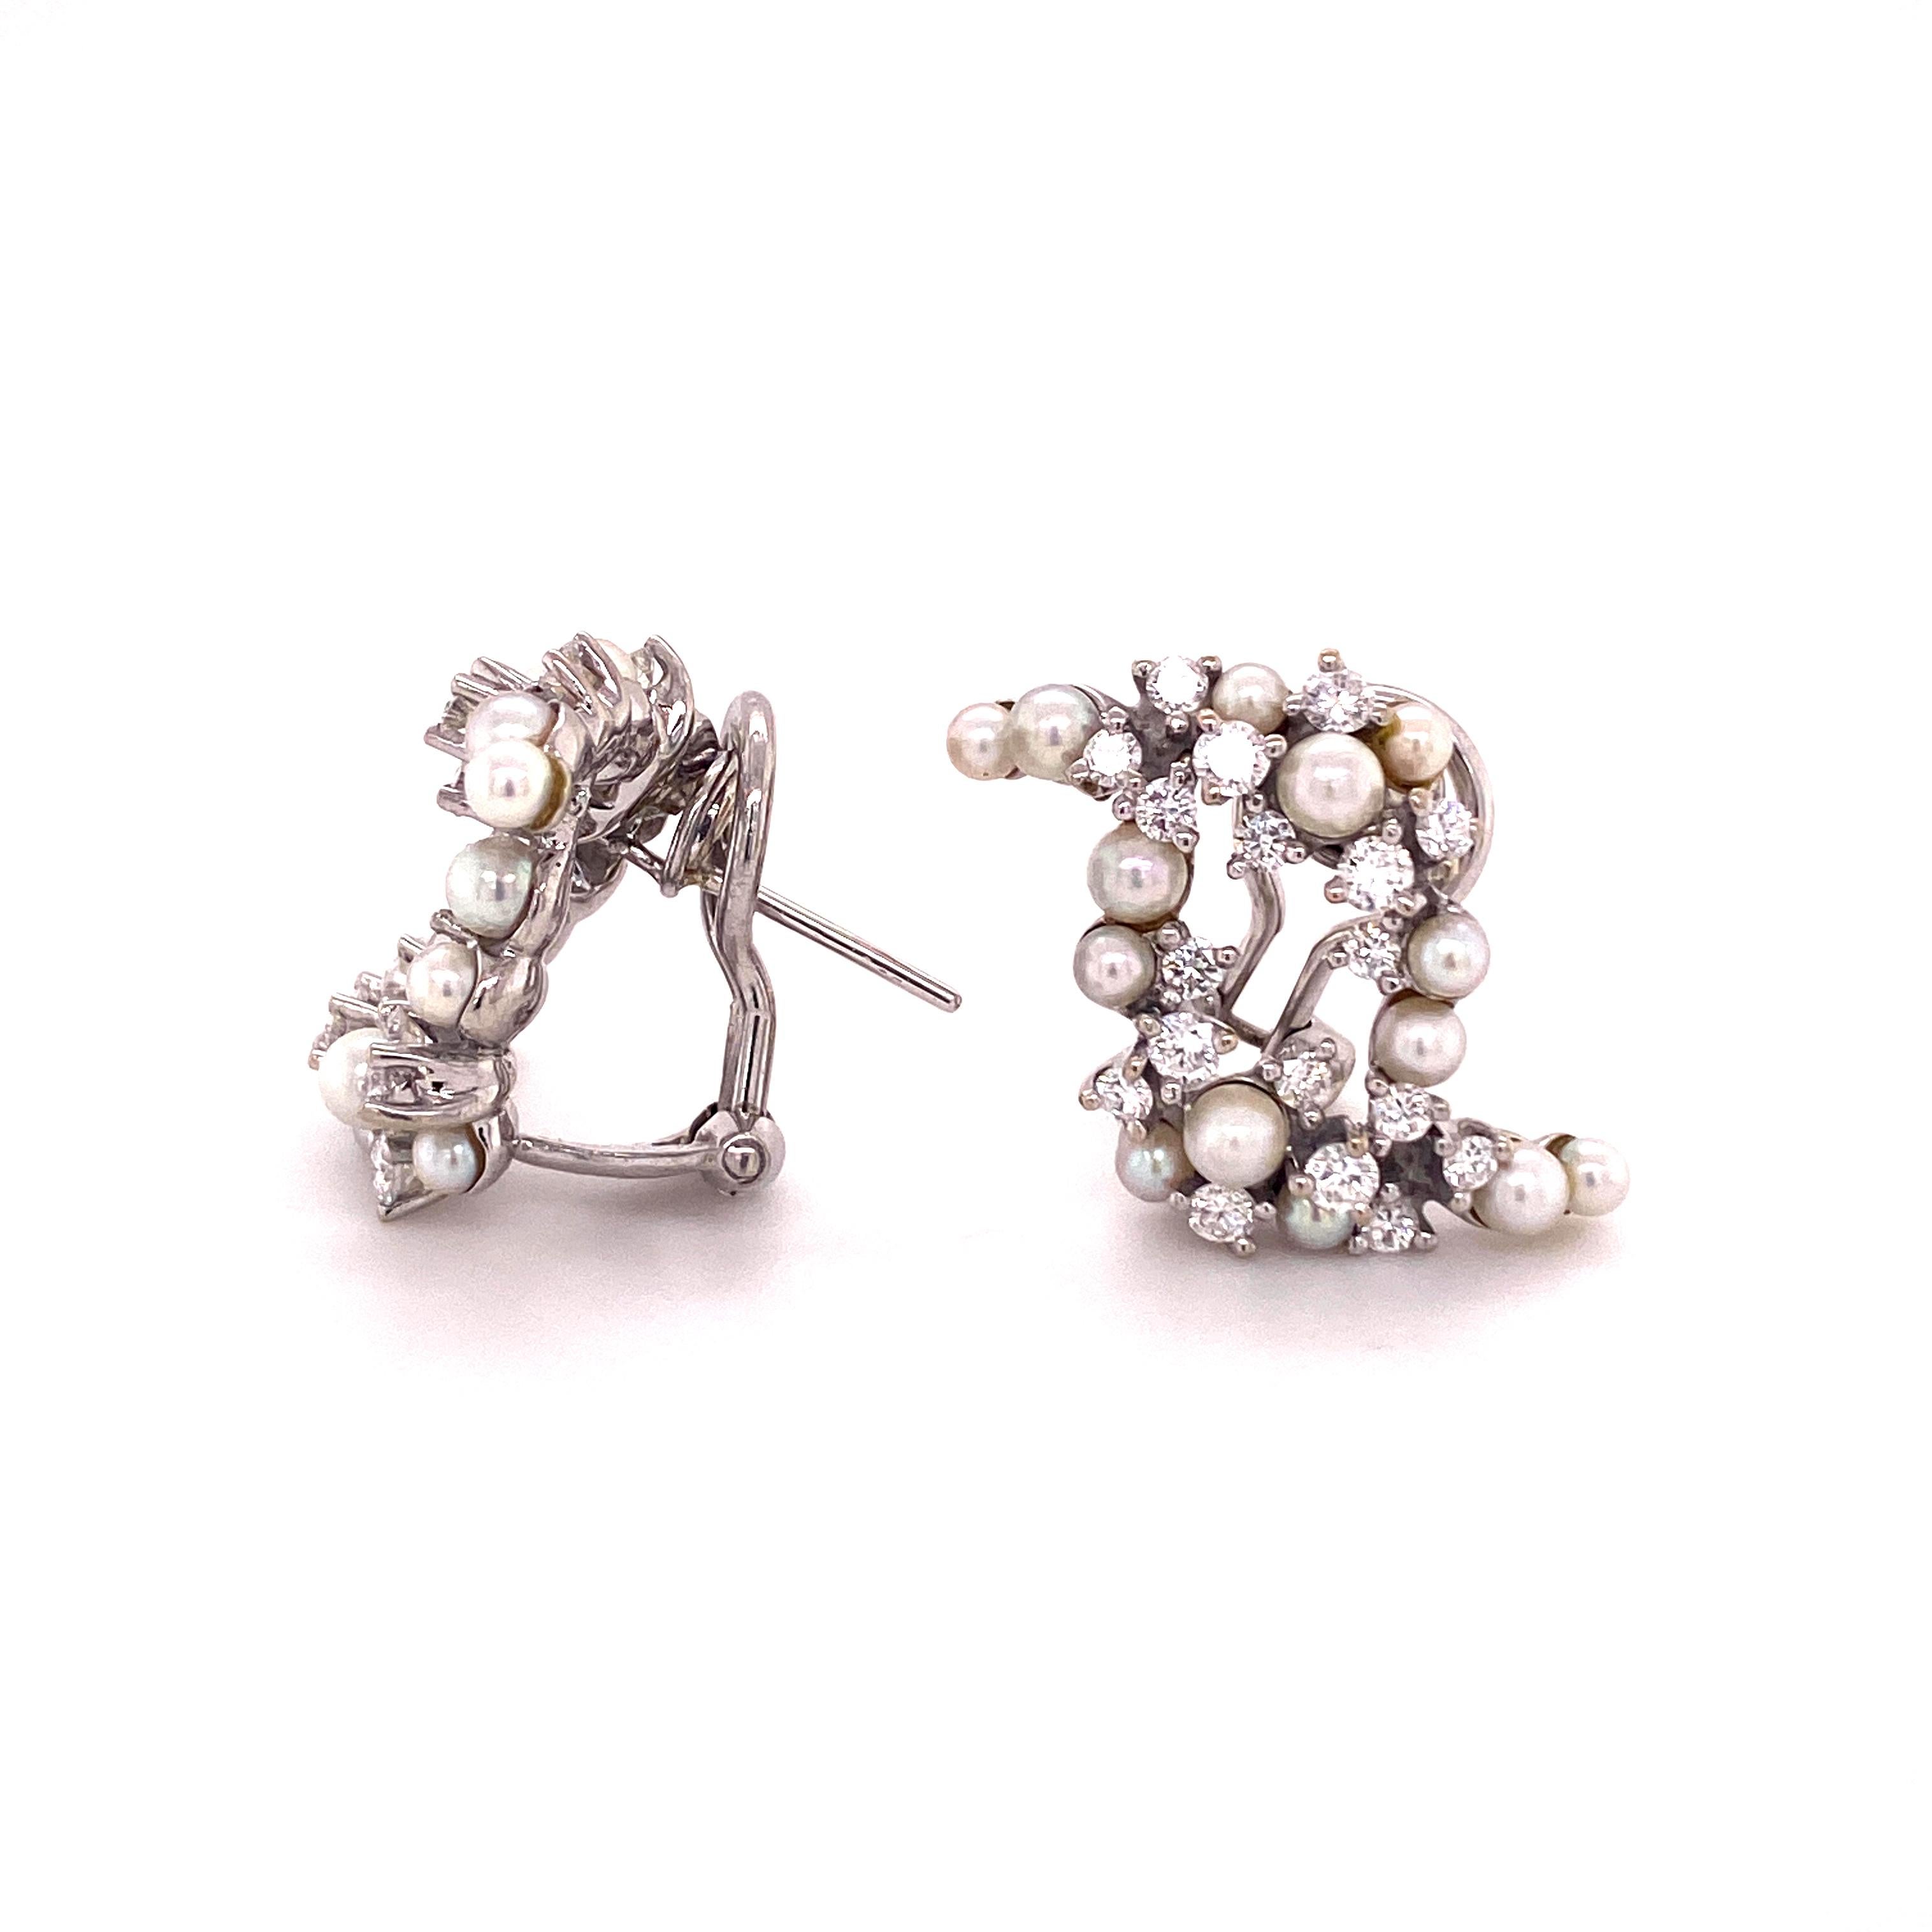 Enchanting ear clips in white gold 750. The elegant swing and fine work give these earrings a delicate and light look.
Set in prongs with 36 brilliant-cut diamonds totalling 1.00 ct of gem quality. 28 small cultured pearls are smartly placed